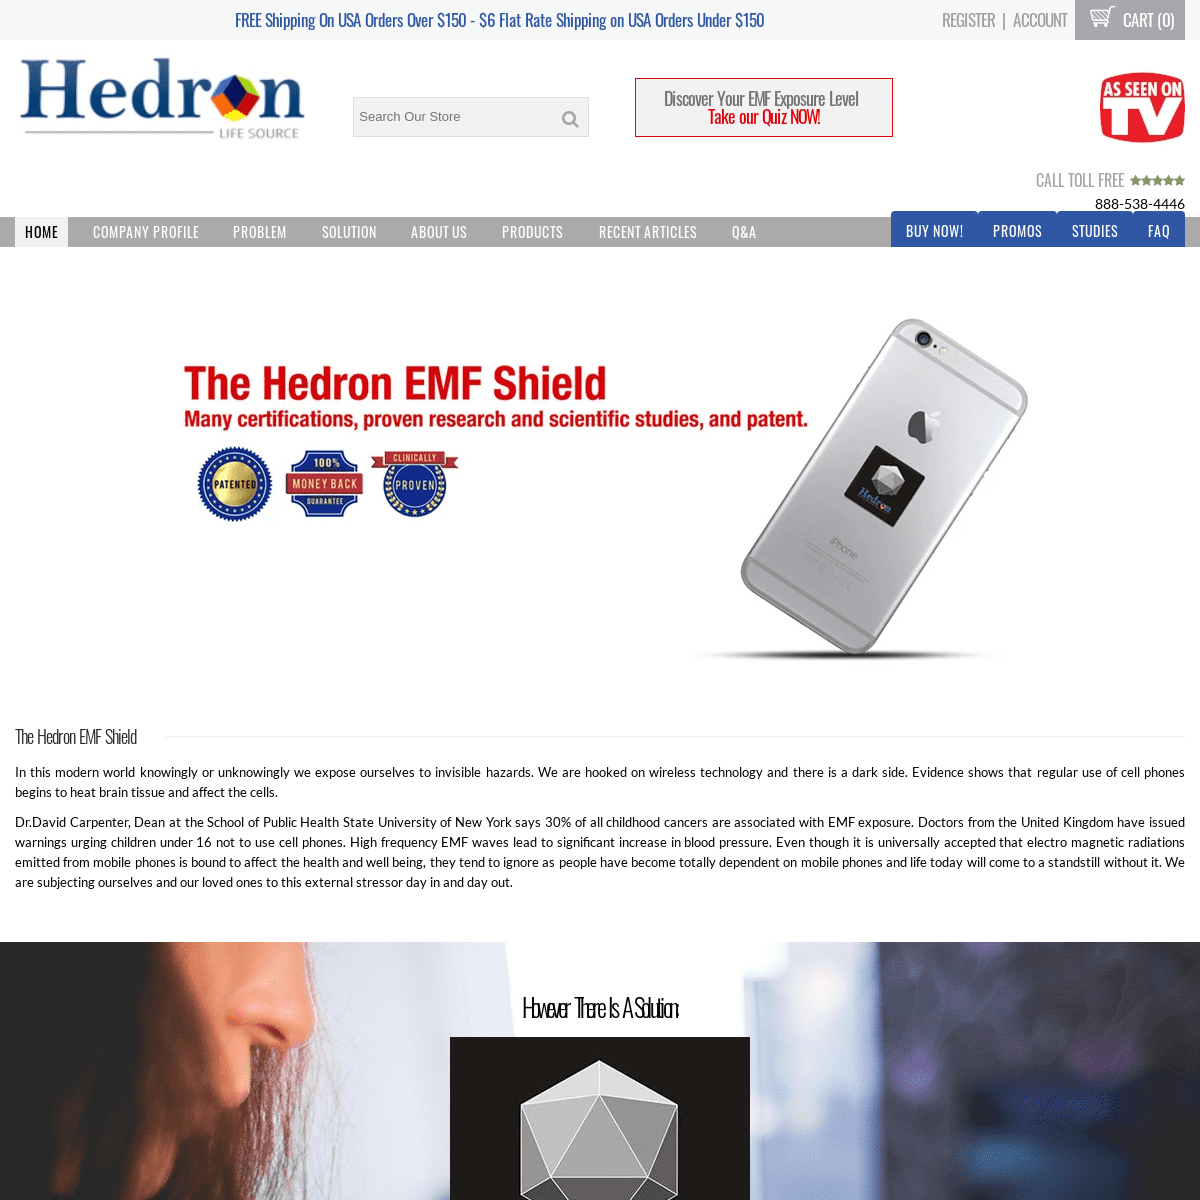 Hedron Life Source | Patented EMF Protection For Body, Home, and all Electronic Devices